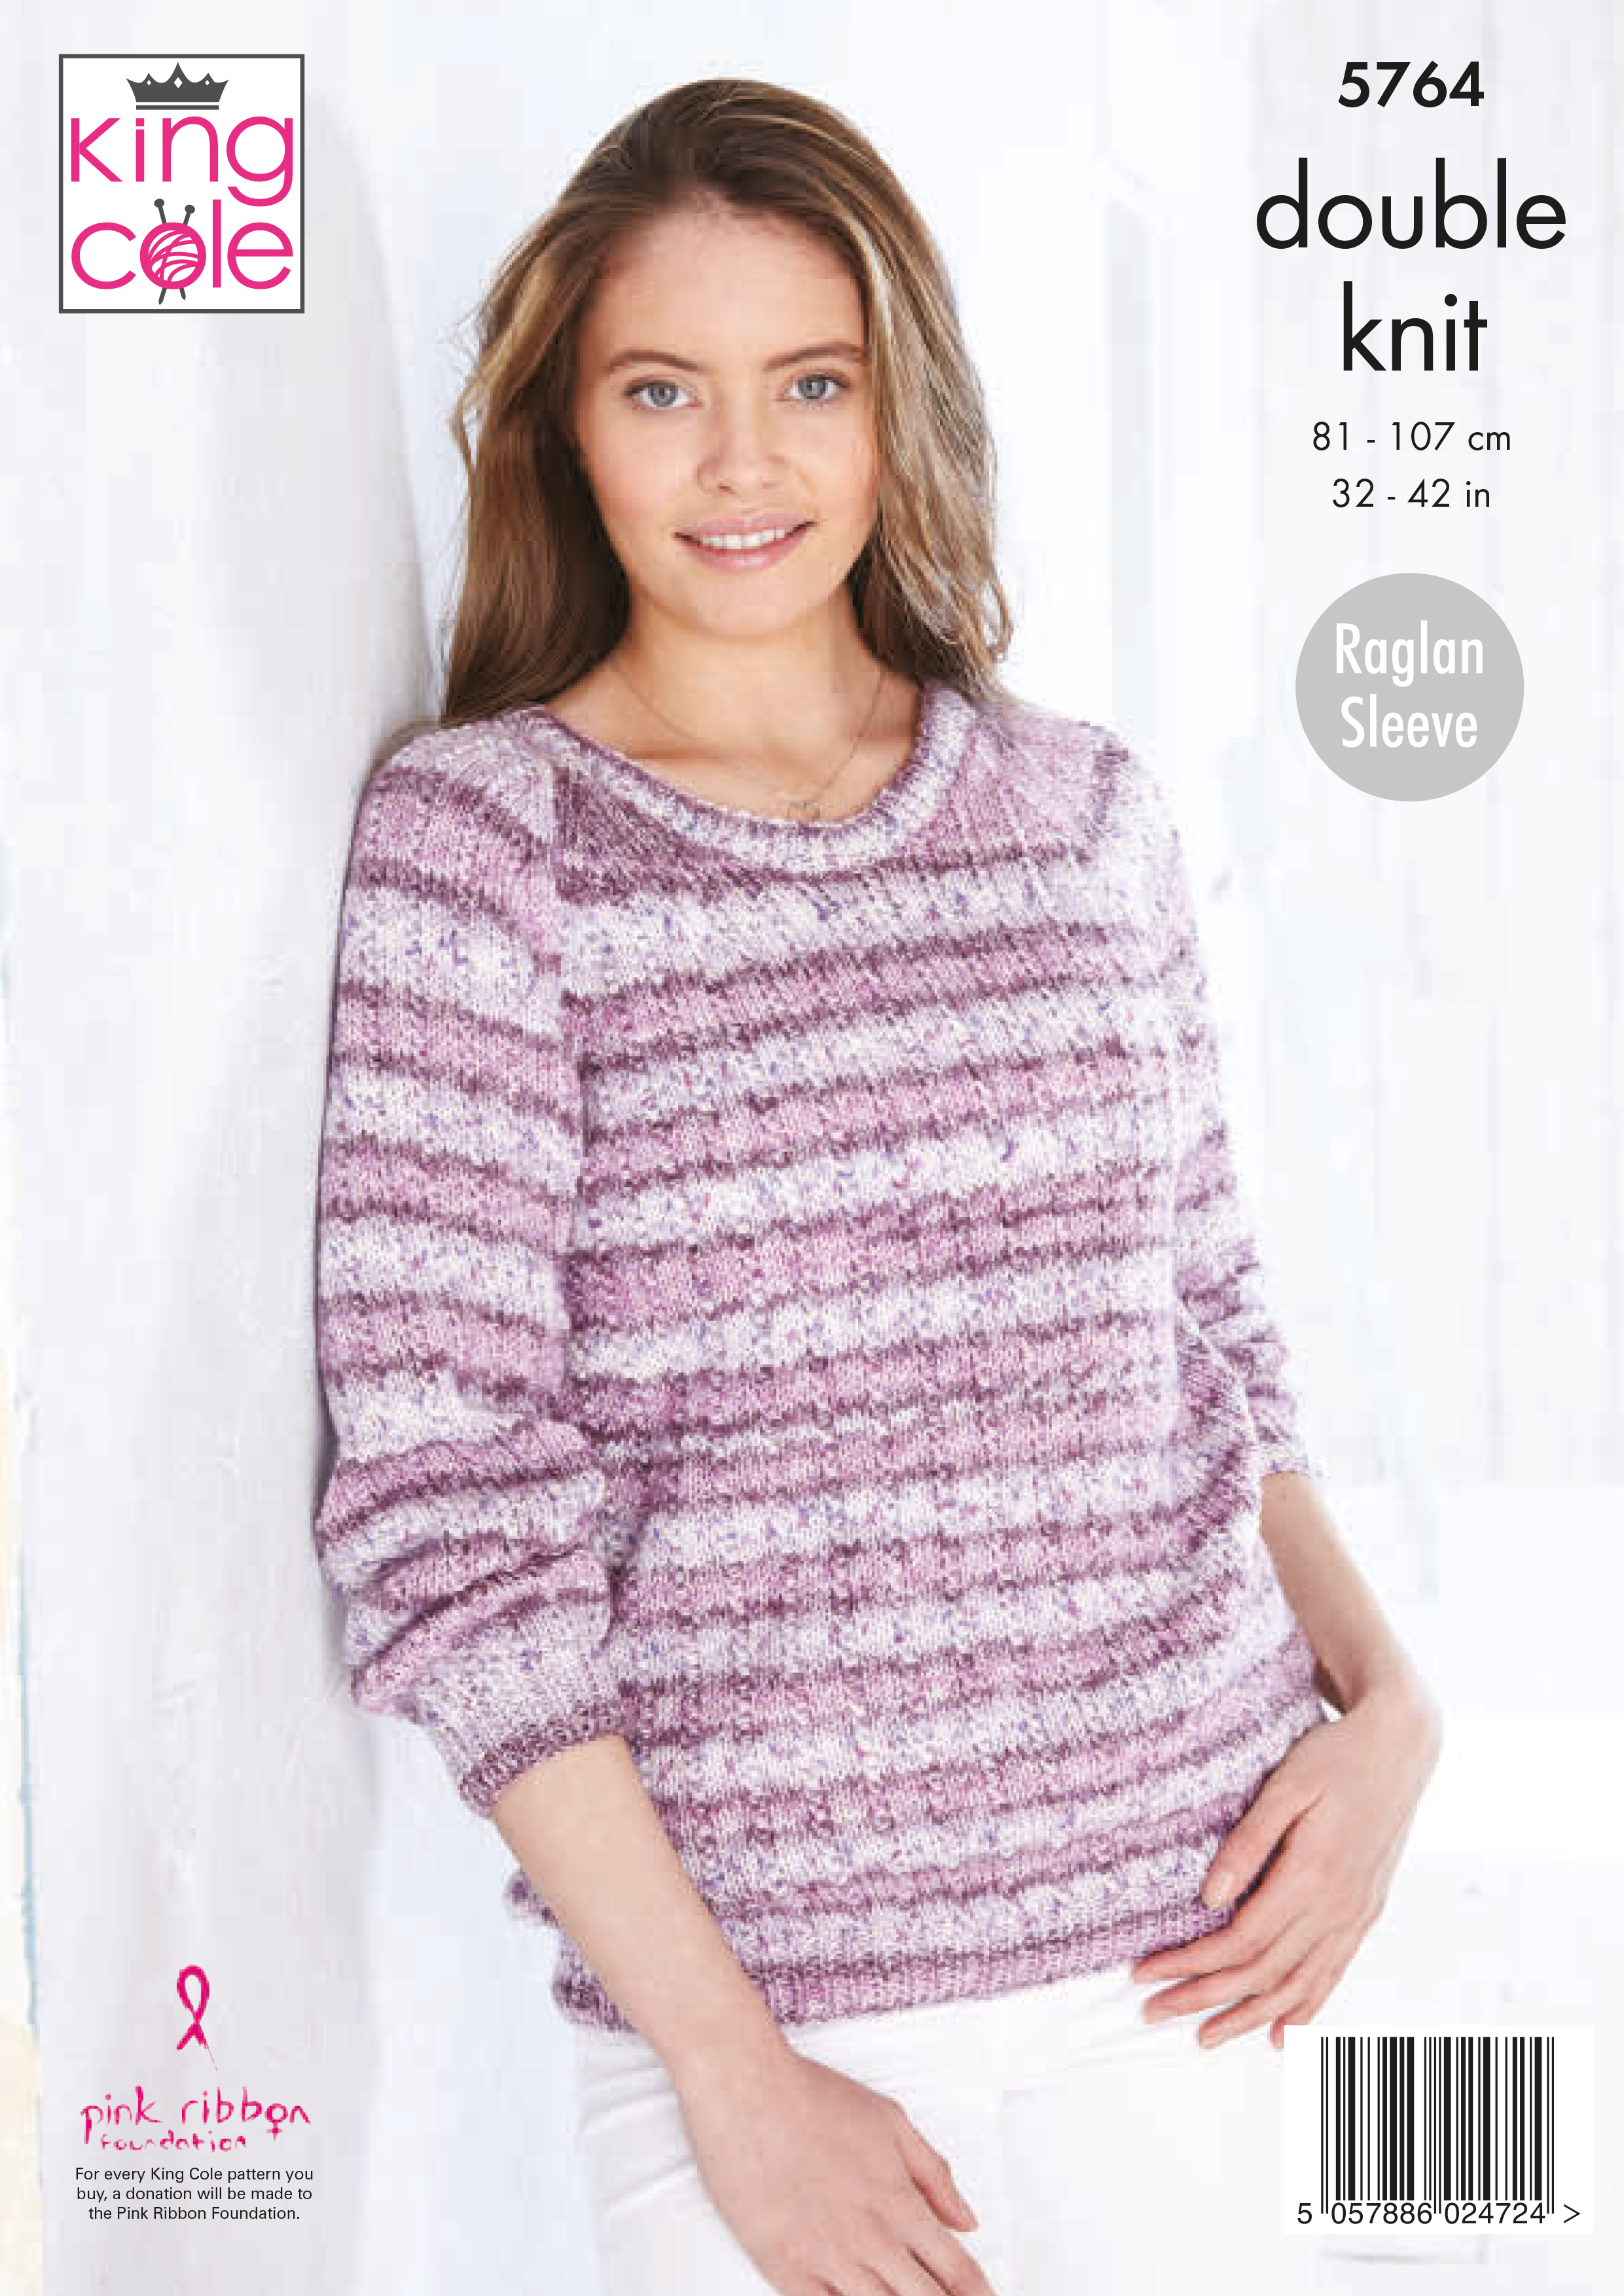 Sweater & Cardigan Knitted in Splash DK 5764 x3 - Click Image to Close